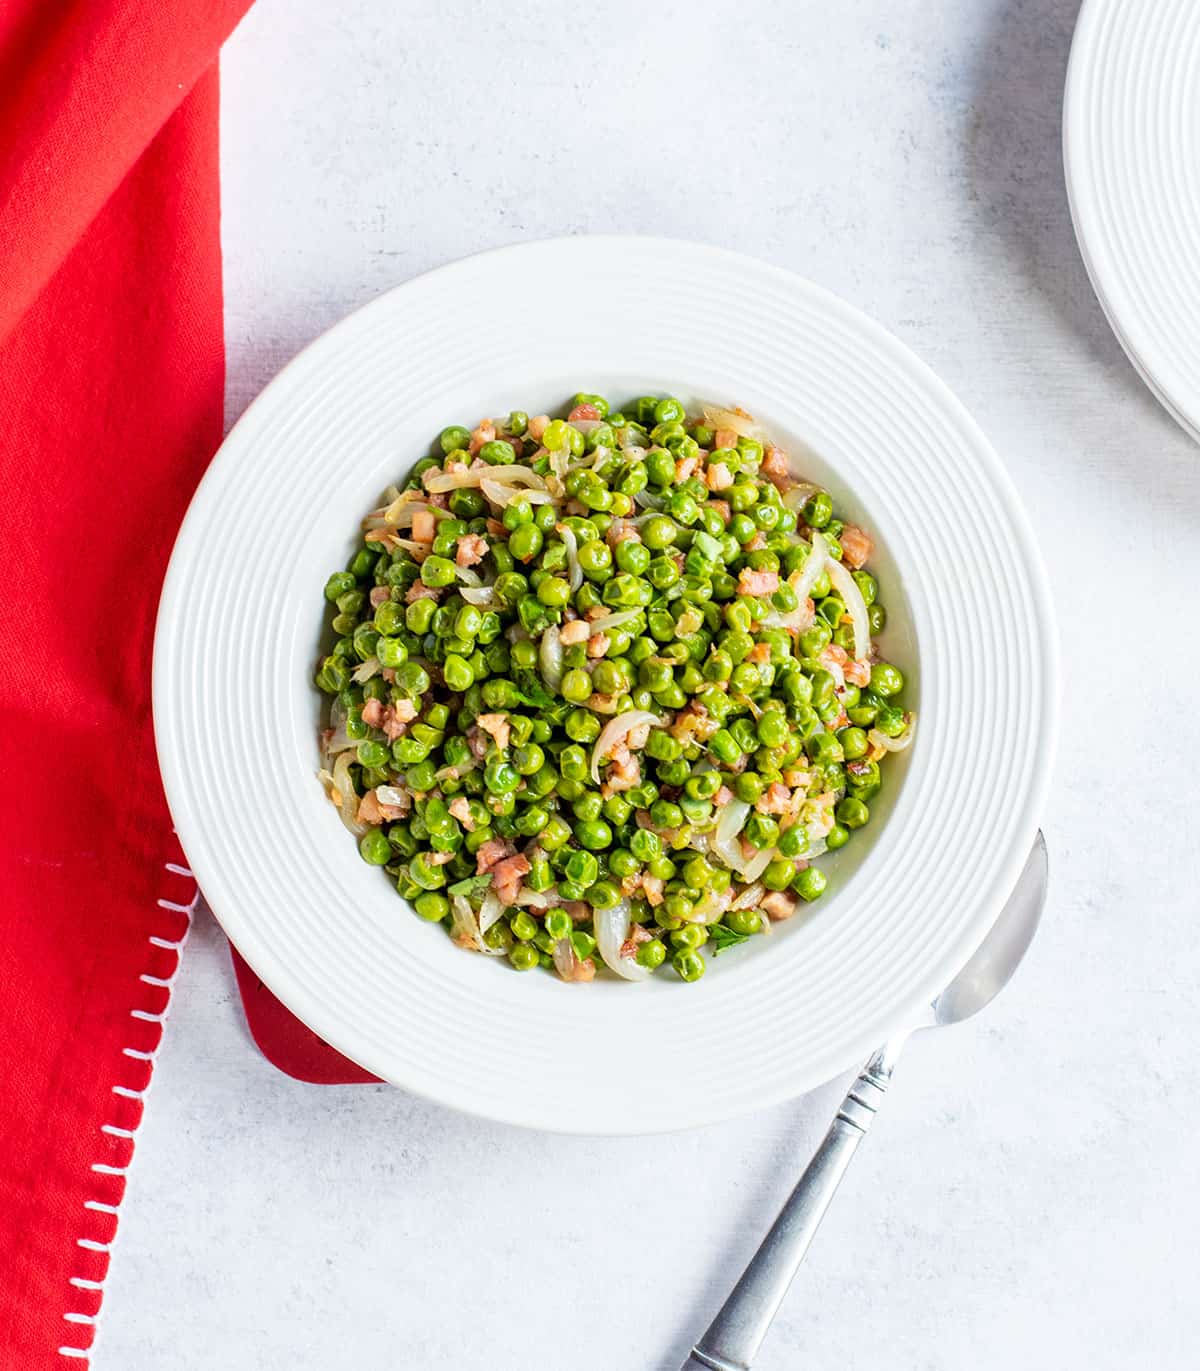 bowl of peas with onions and pancetta, red napkin, spoon